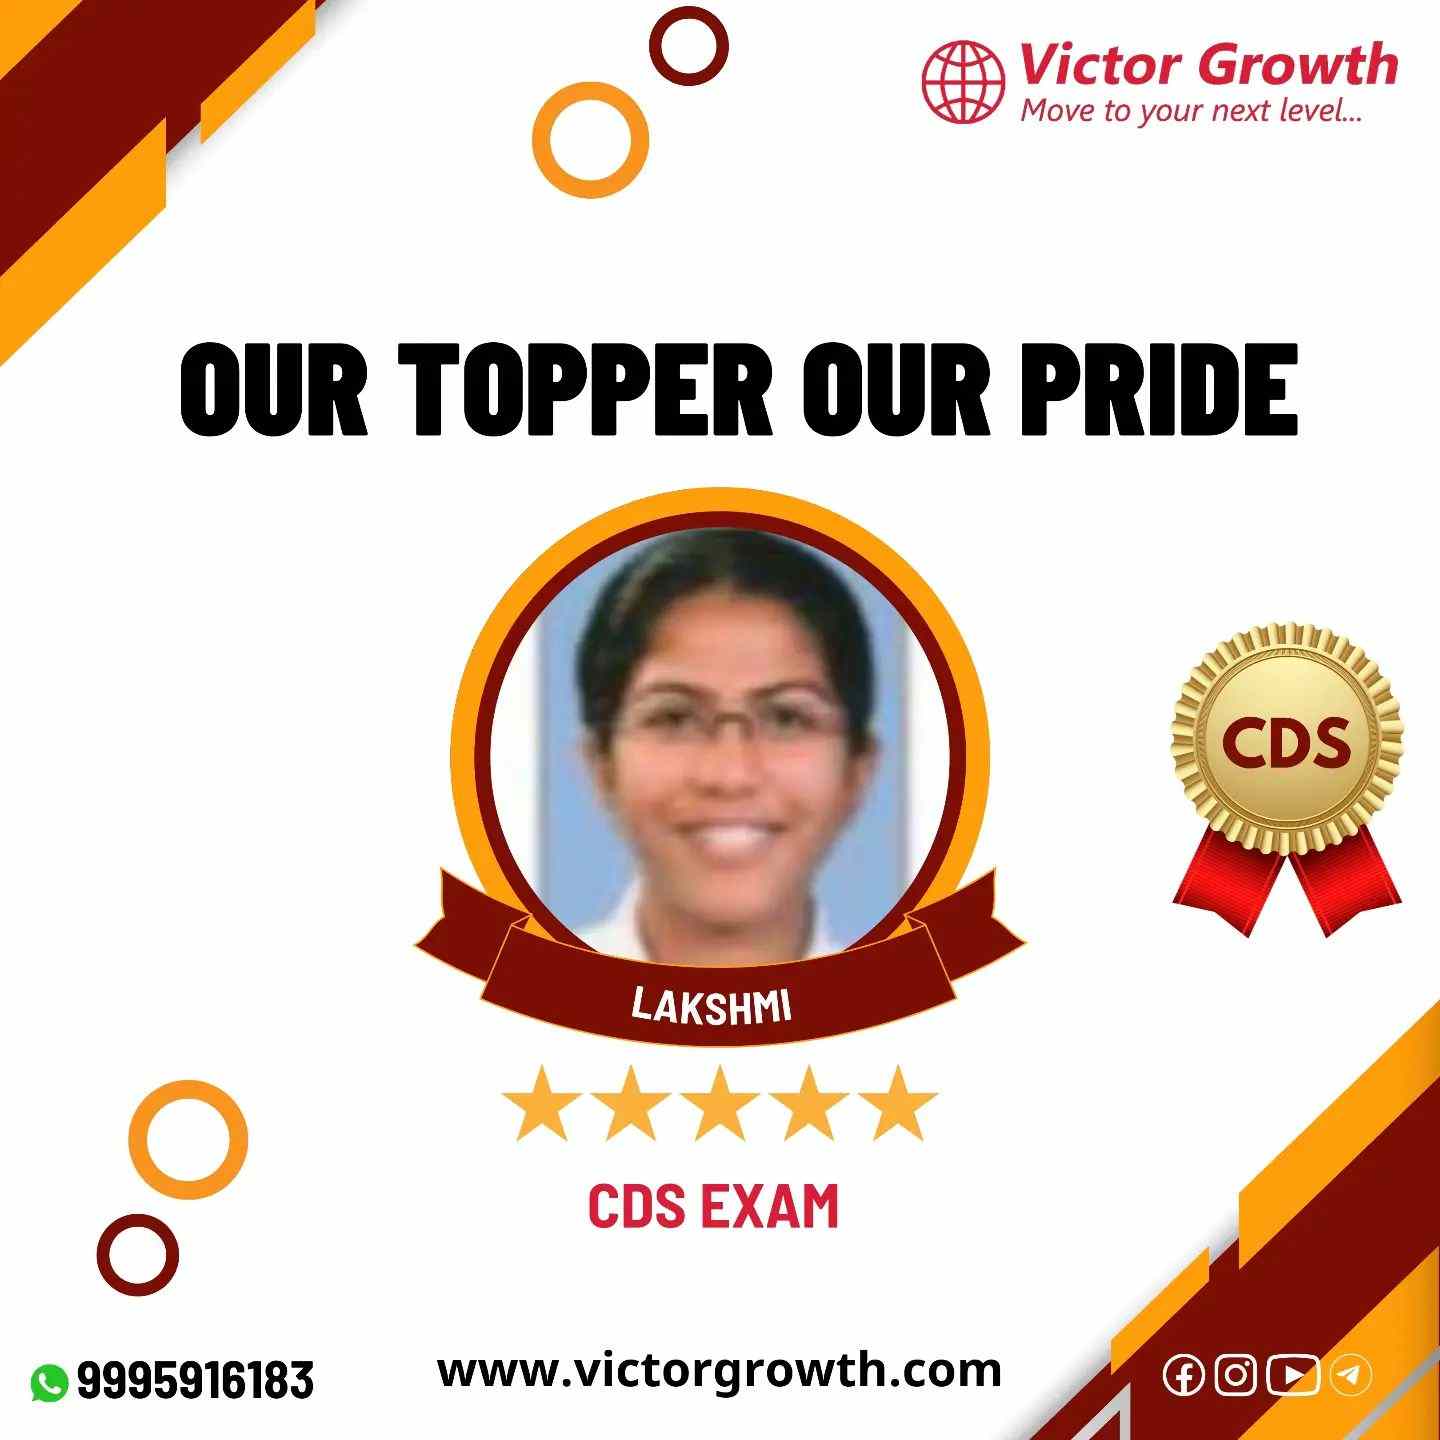 Victor Growth IAS Academy Kochi Topper Student 2 Photo